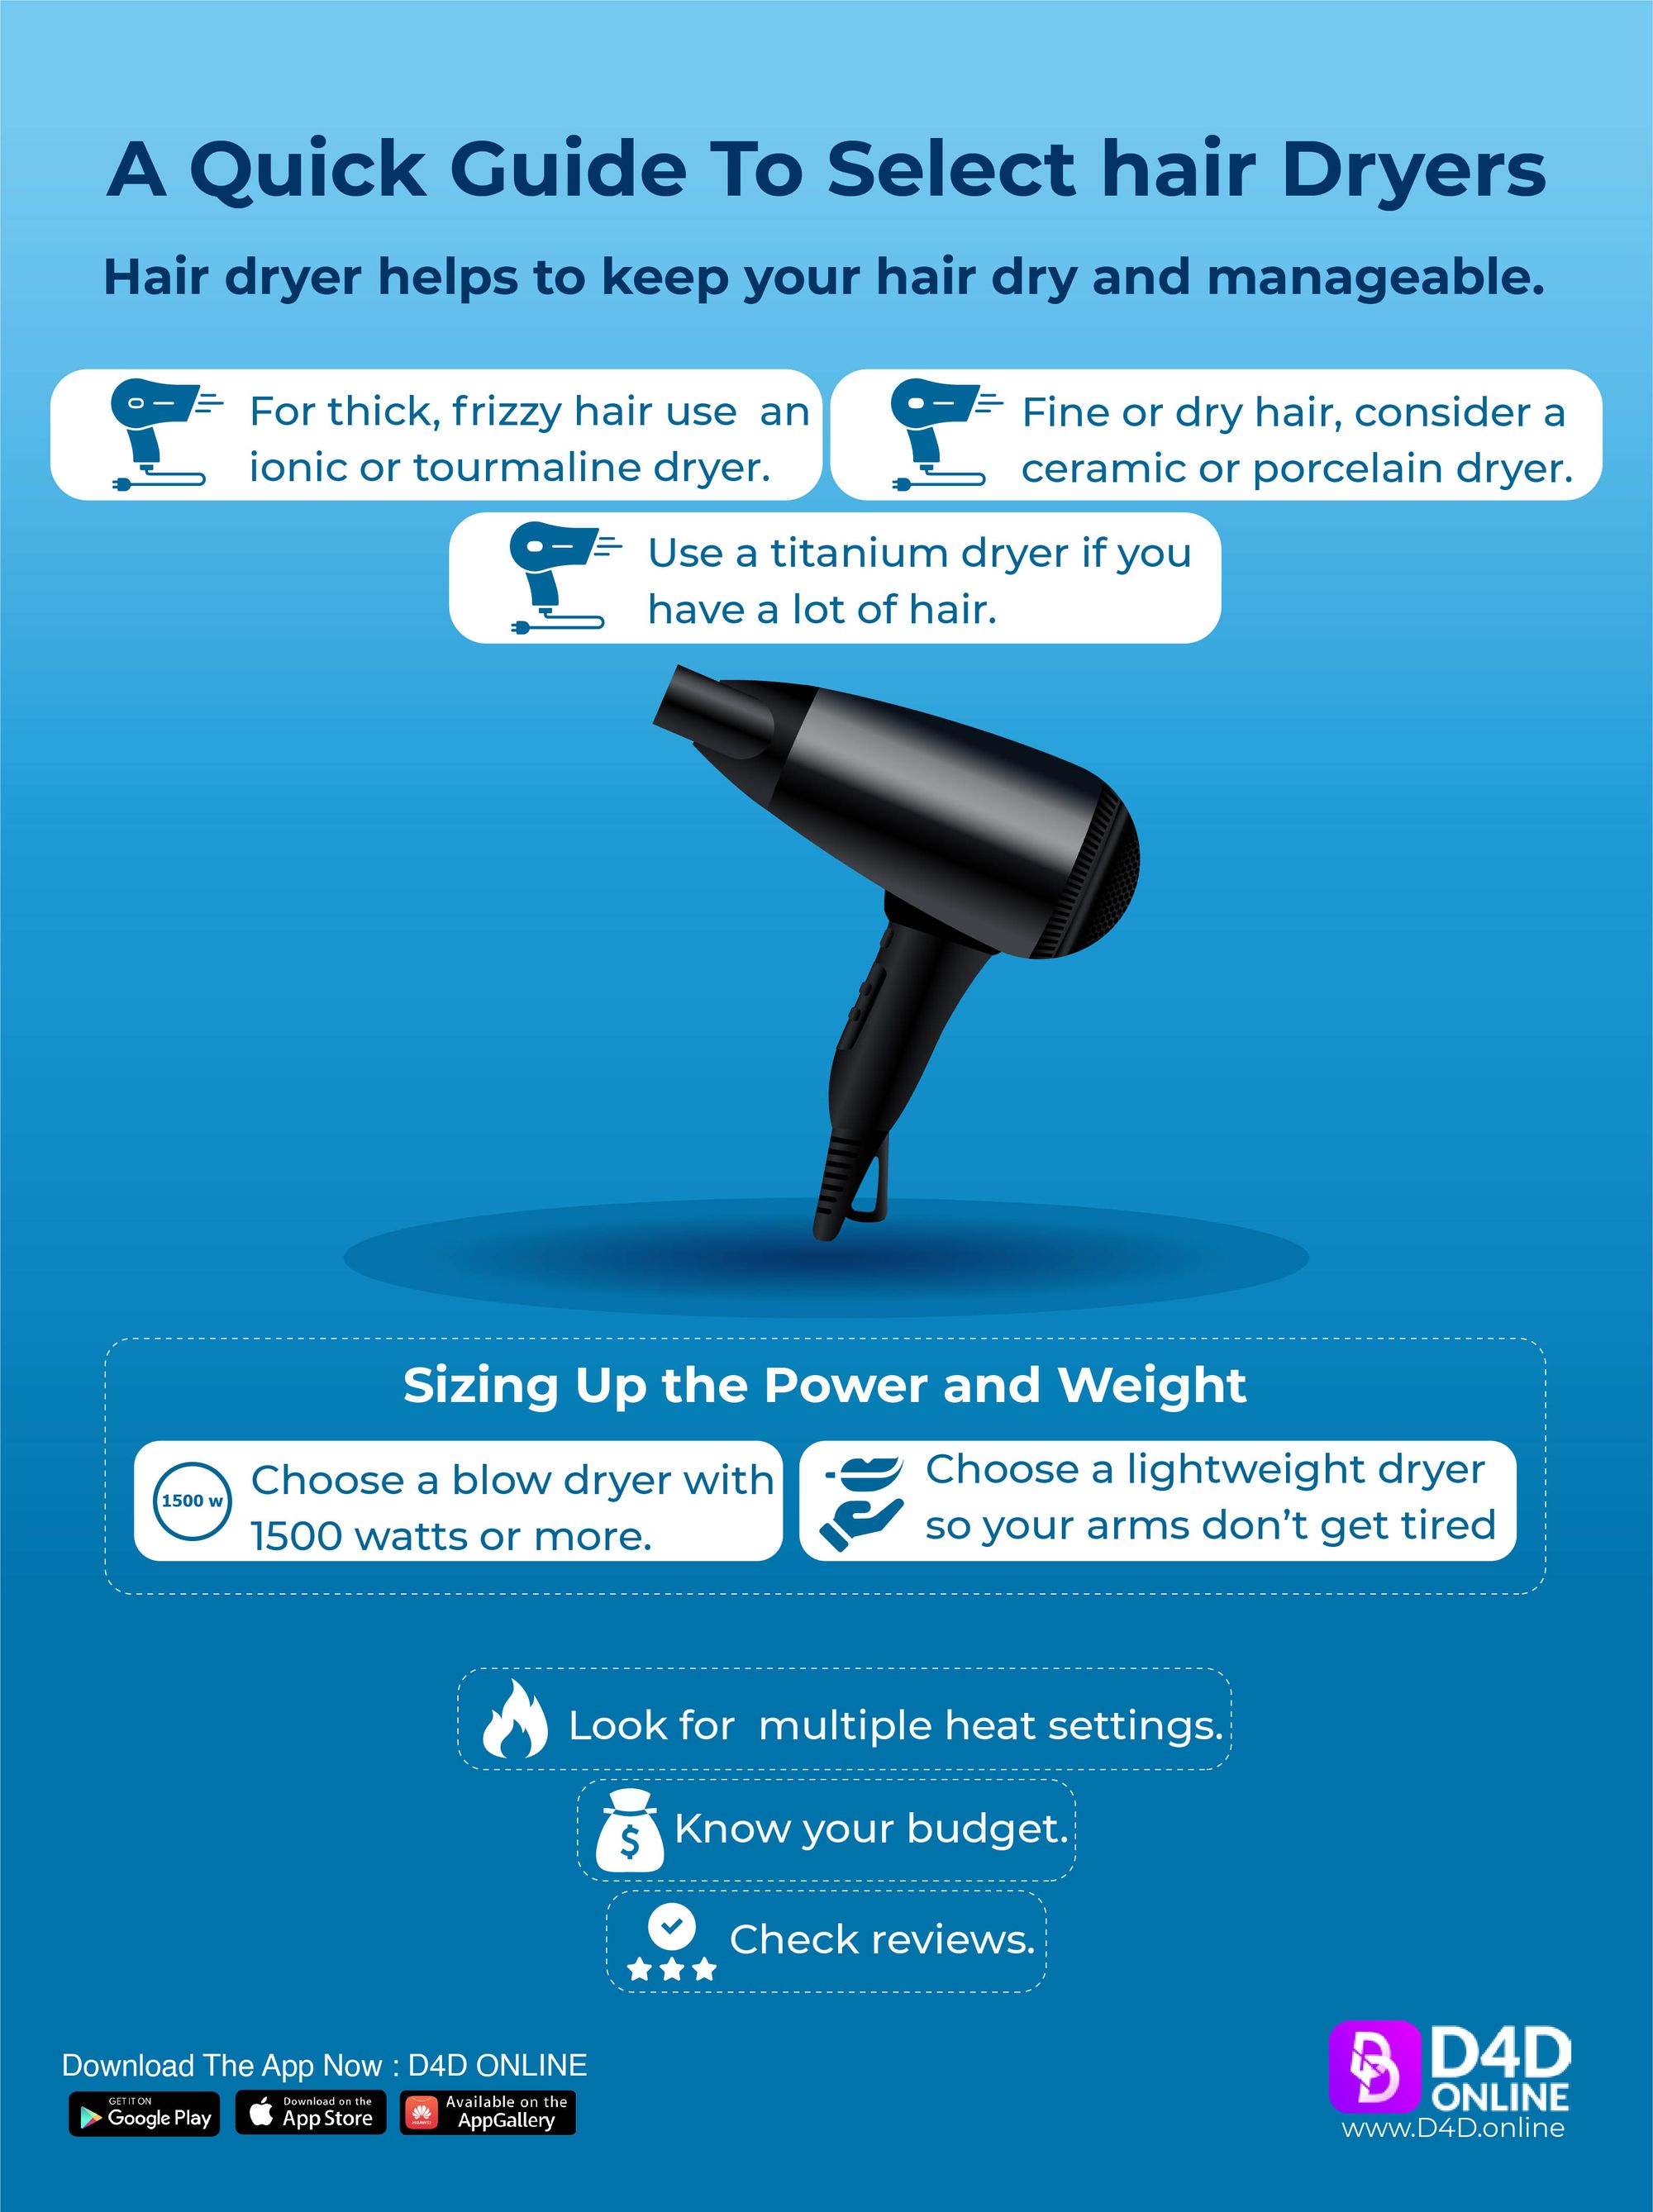 A QUICK GUIDE TO SELECT HAIR DRYERS [INFOGRAPHICS]